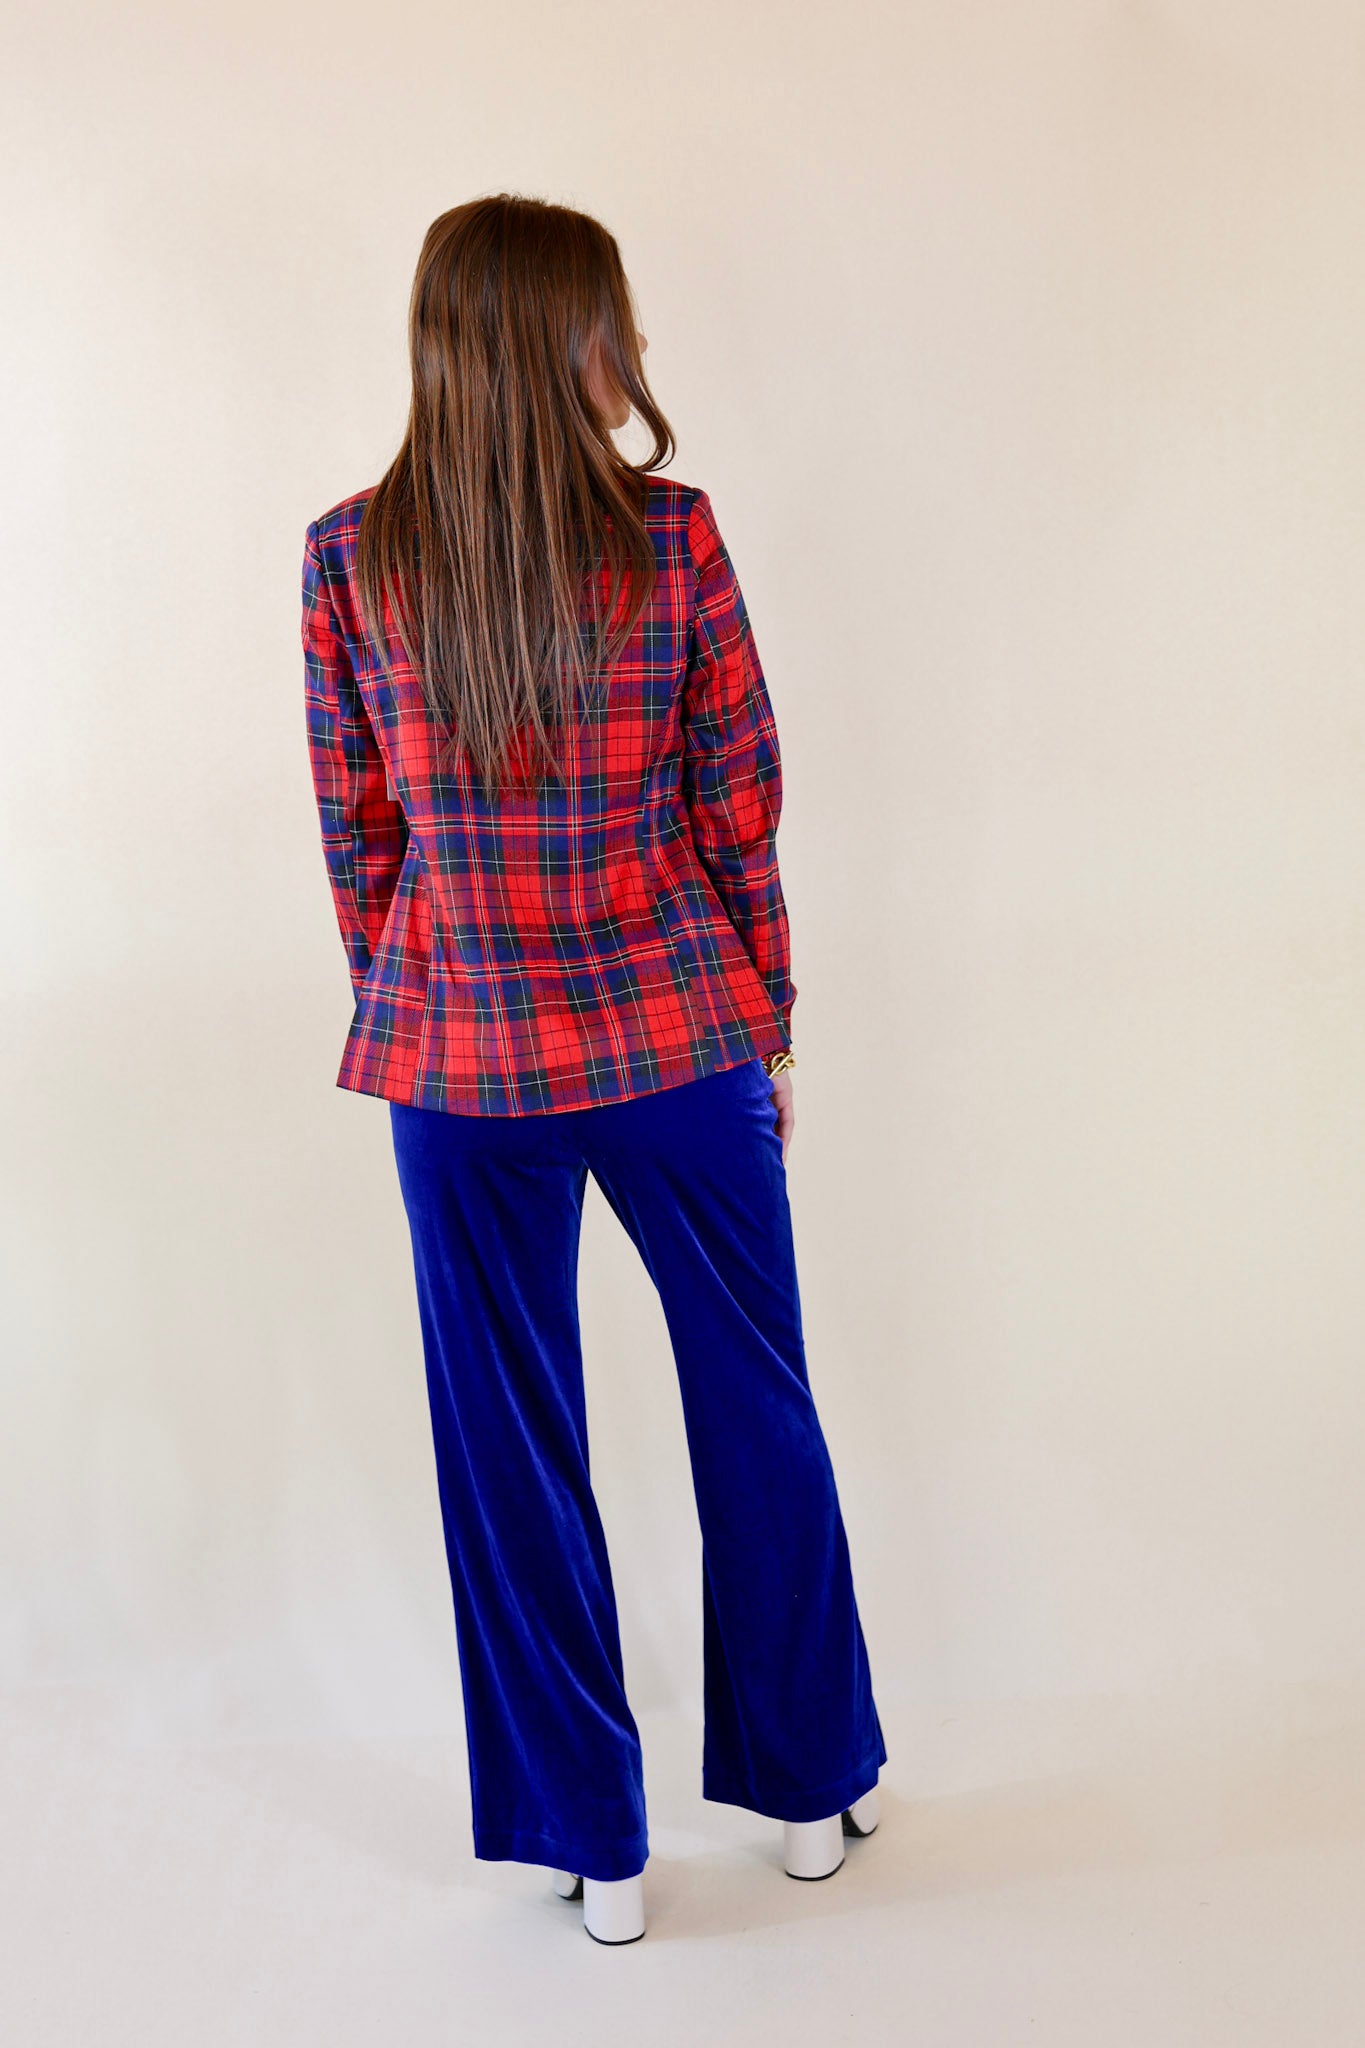 Endless Cheer Plaid Blazer with Gold Buttons in Blue and Red - Giddy Up Glamour Boutique